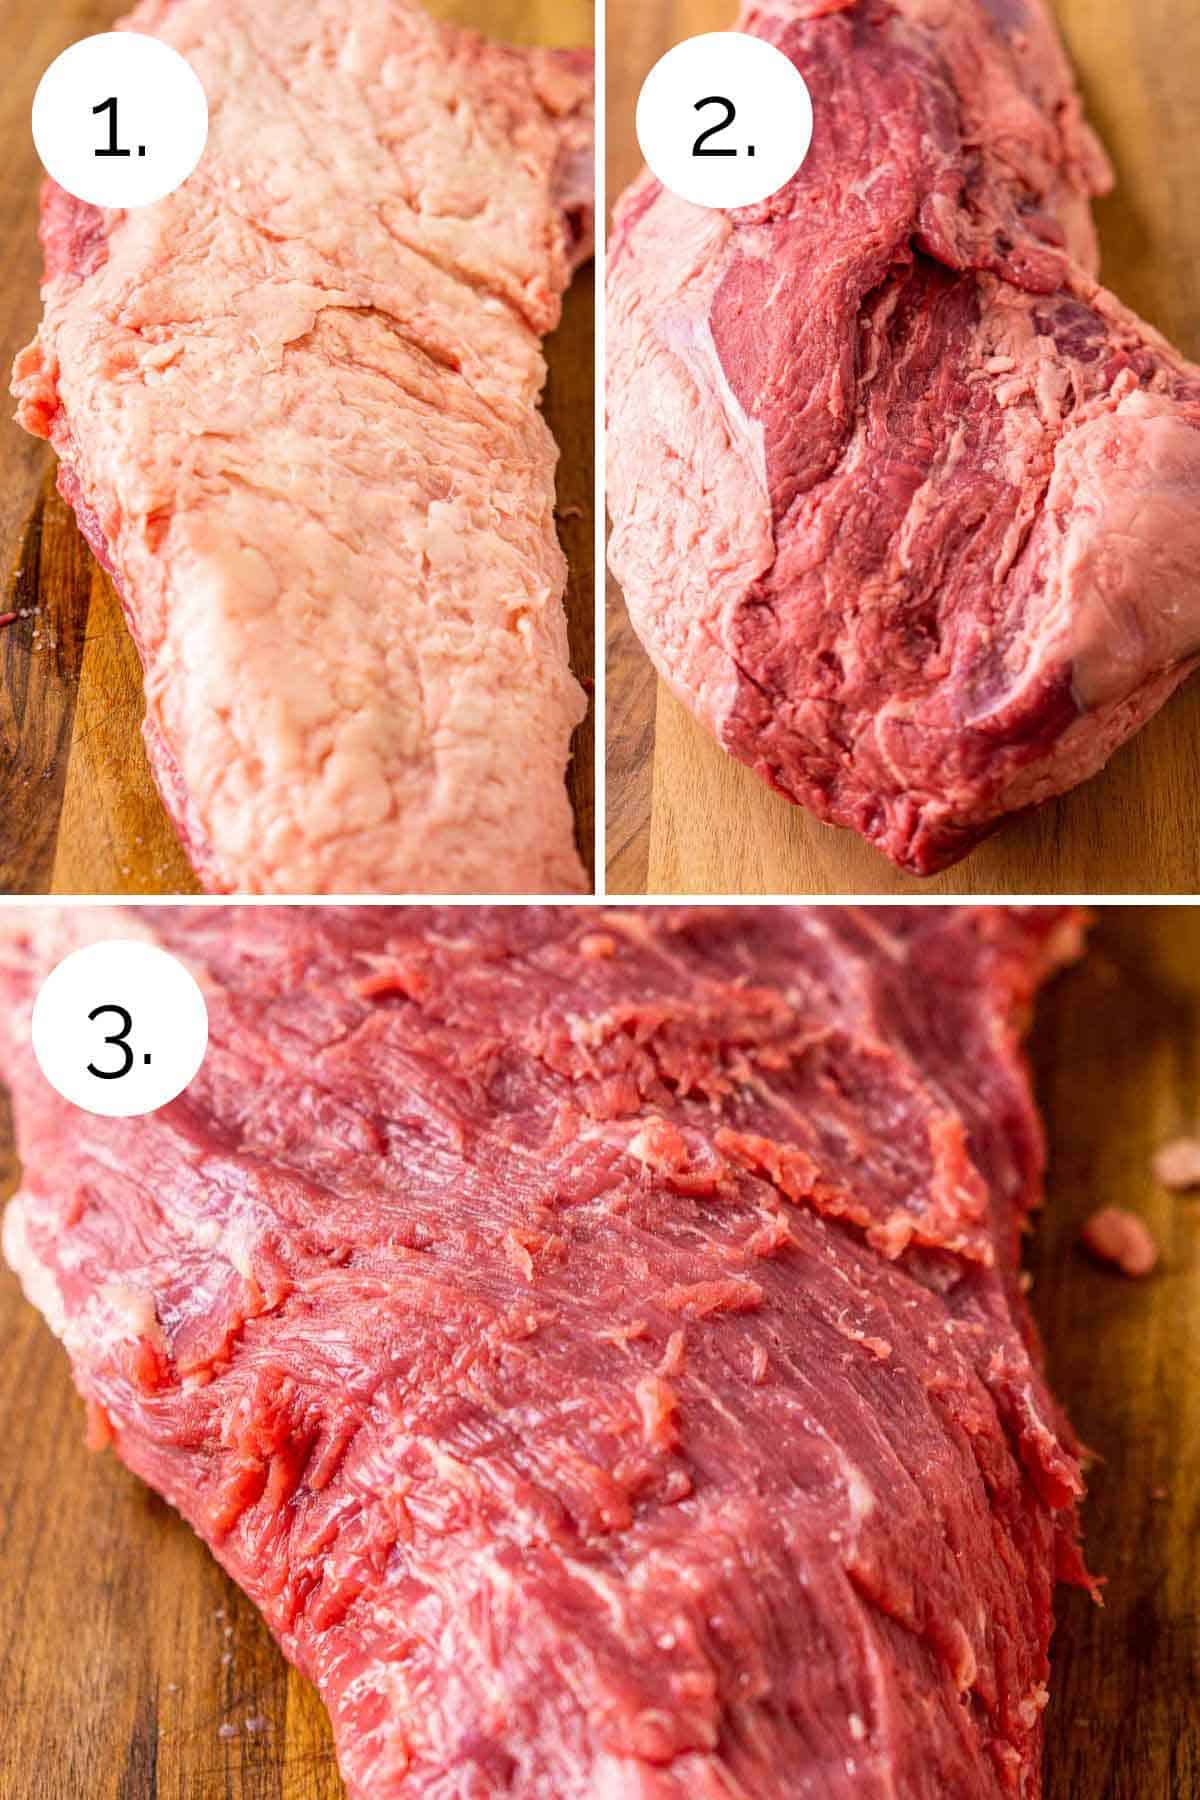 A collage showing the process of trimming both sides of the tri tip on a wooden cutting board.